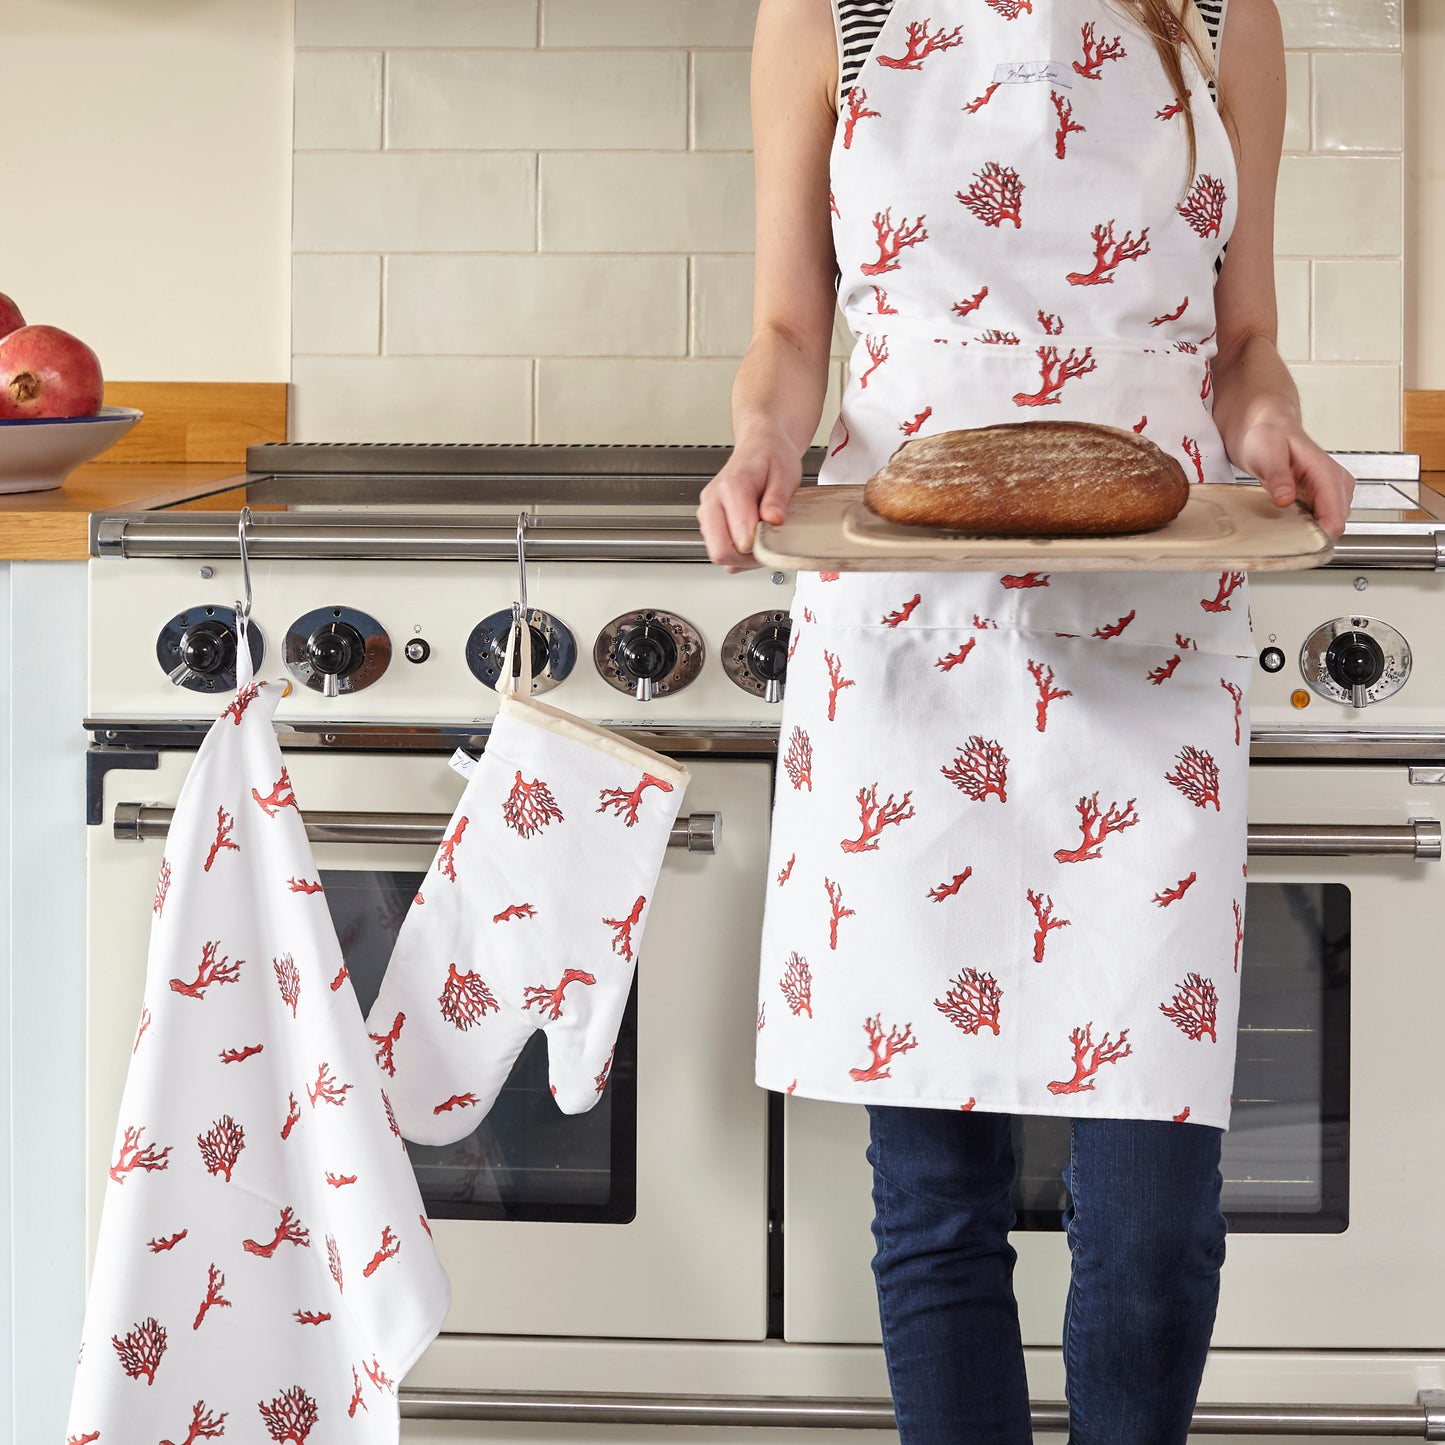 coral print apron , coral print oven glove and coral print tea towel in the kitchen 